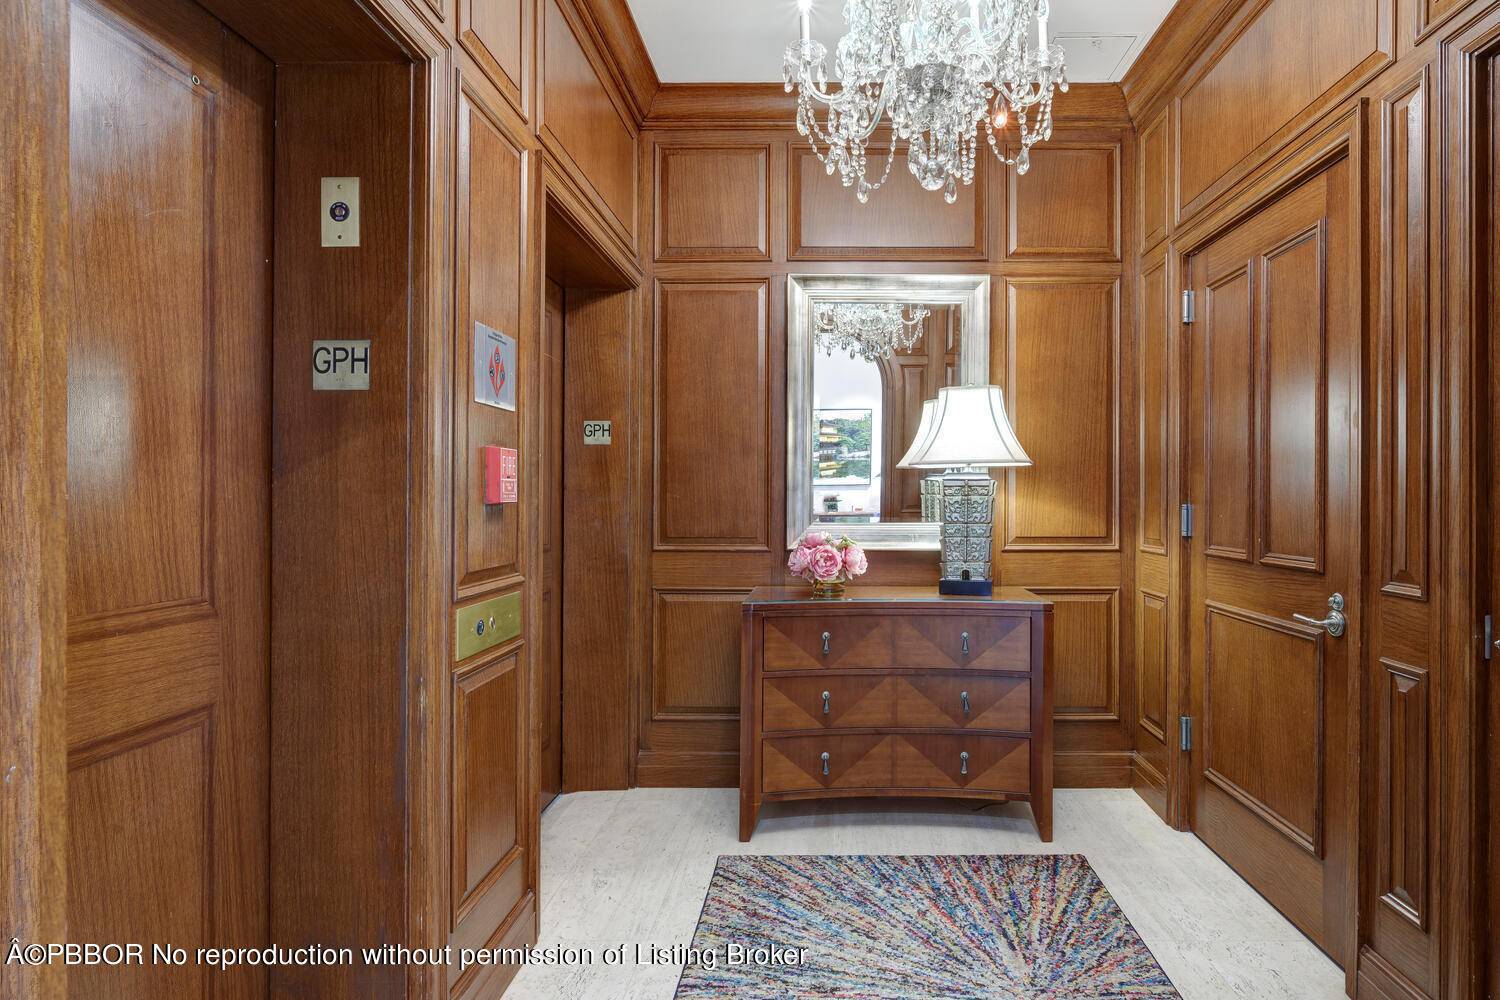 First time on the market in 24 years, one of only four Grand Penthouses at The Plaza.